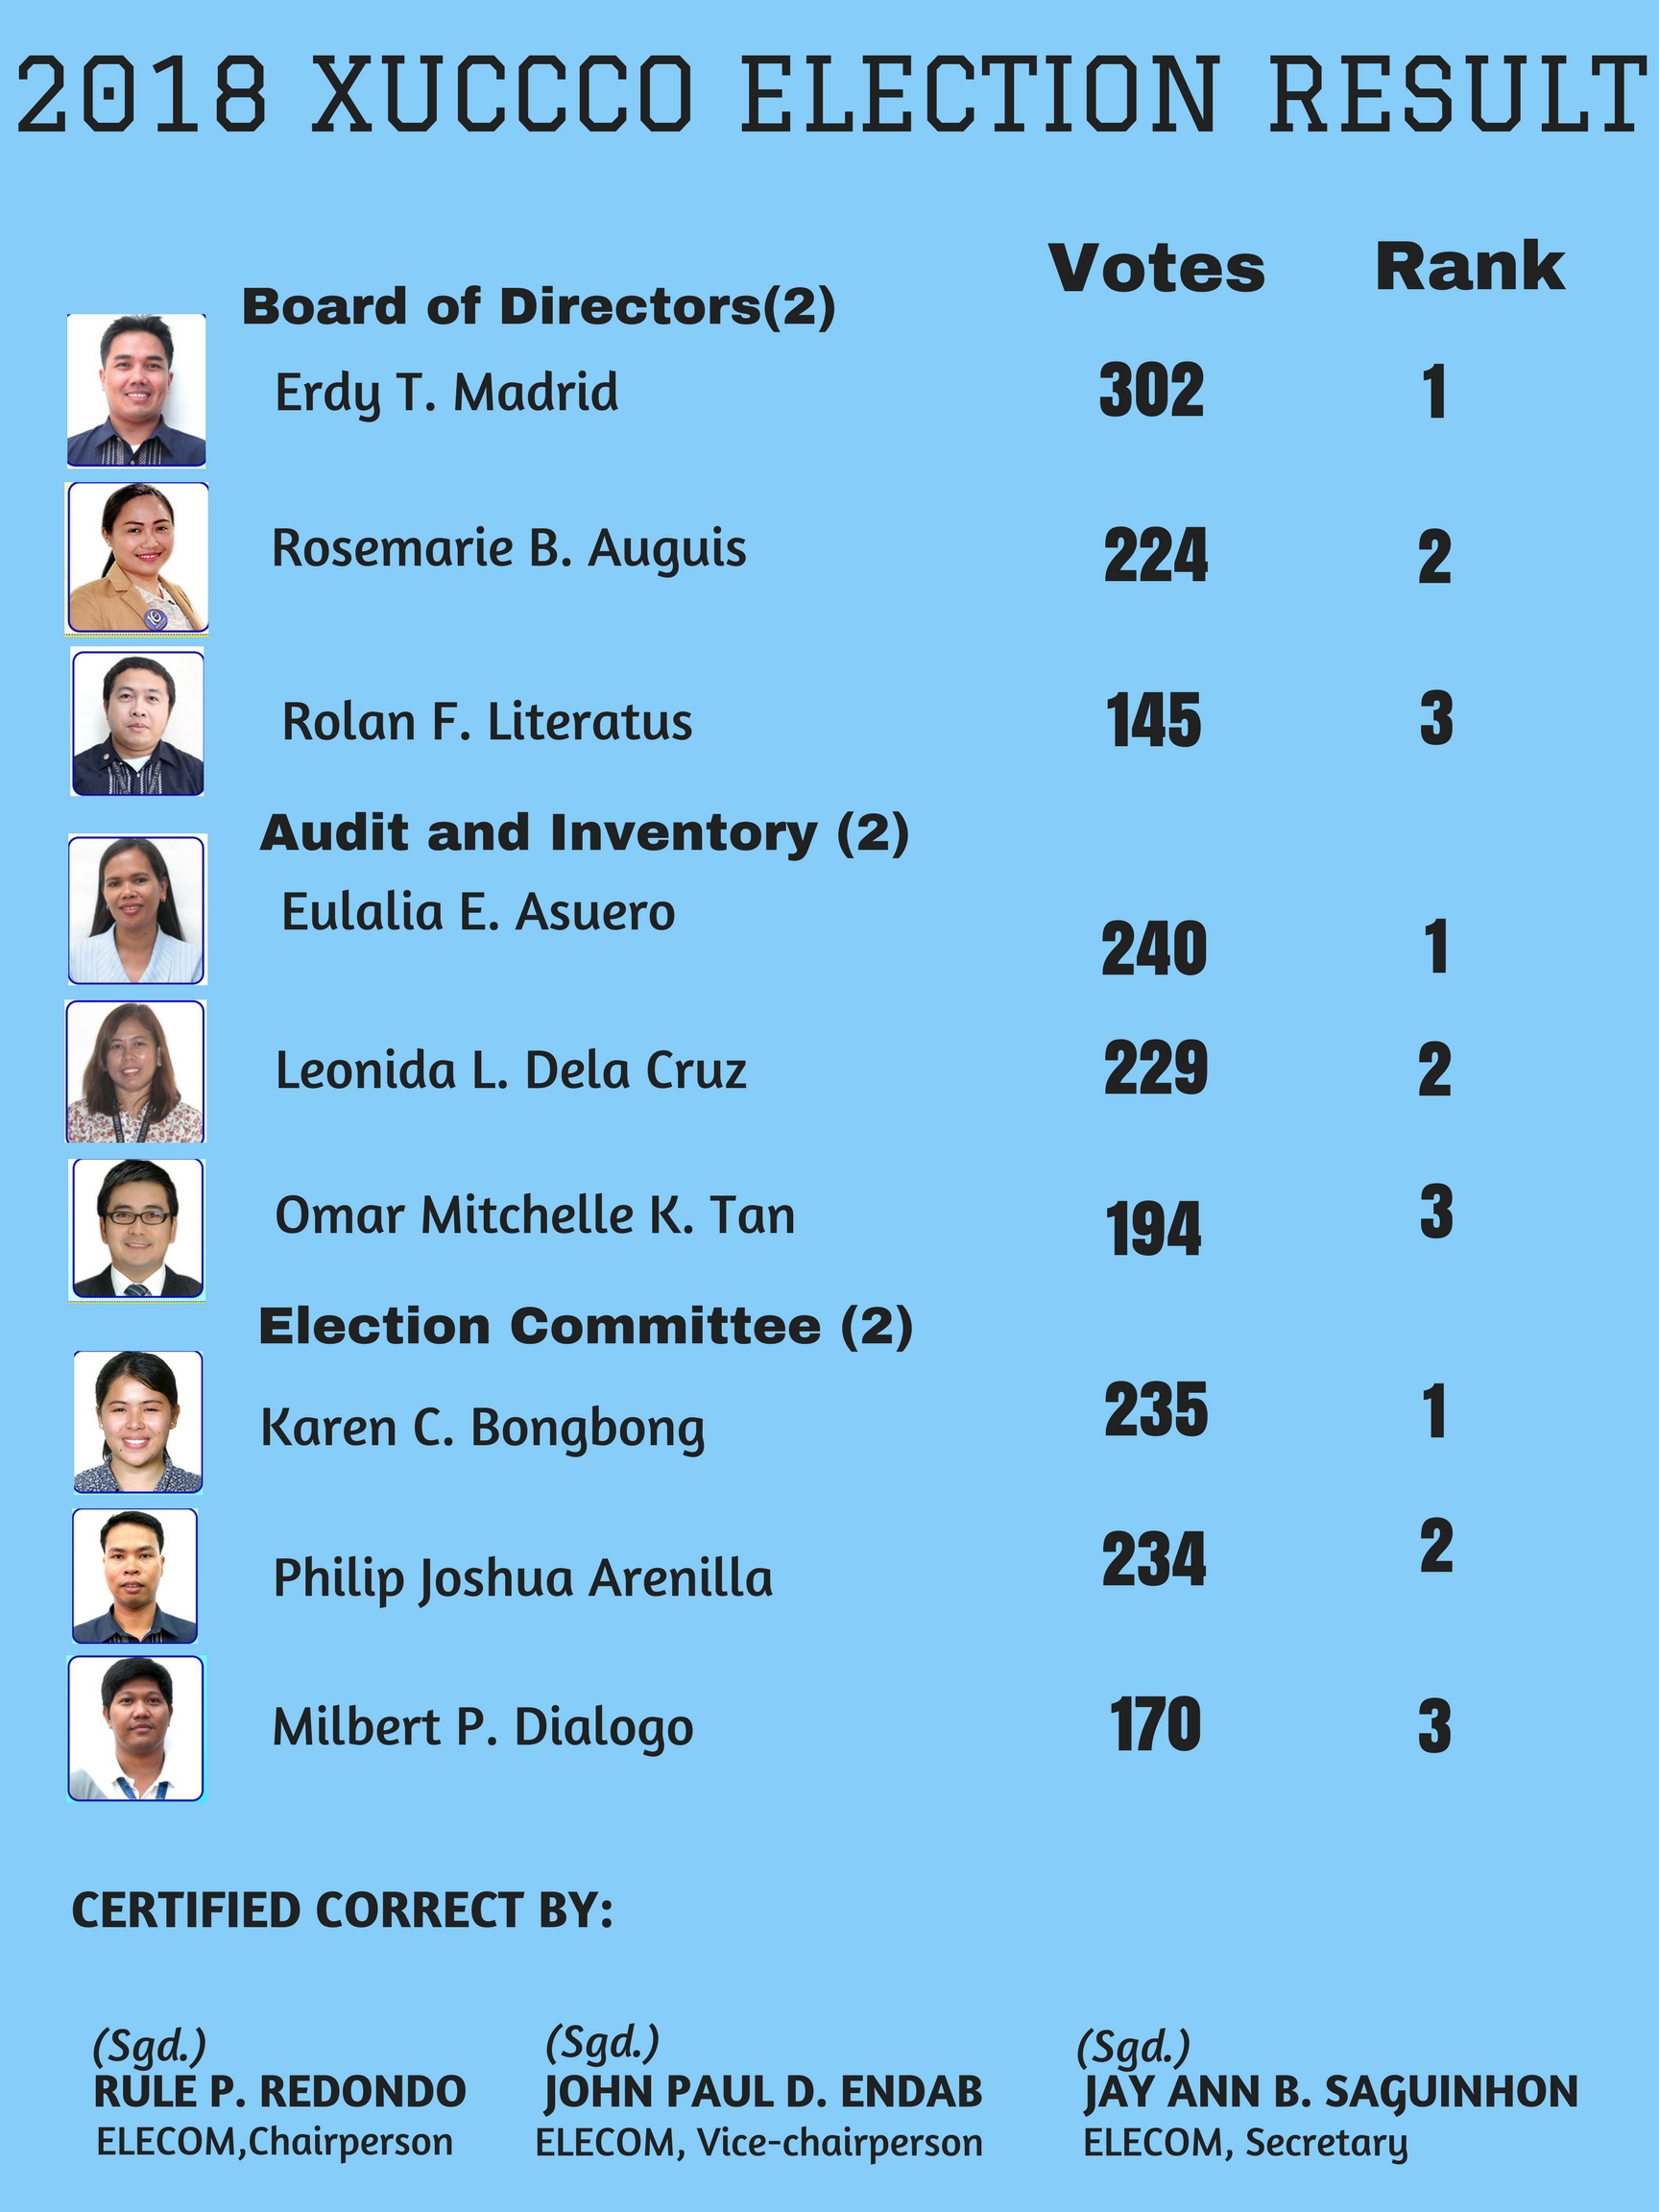 REVISED 2018 XUCCCO ELECTION RESULT 